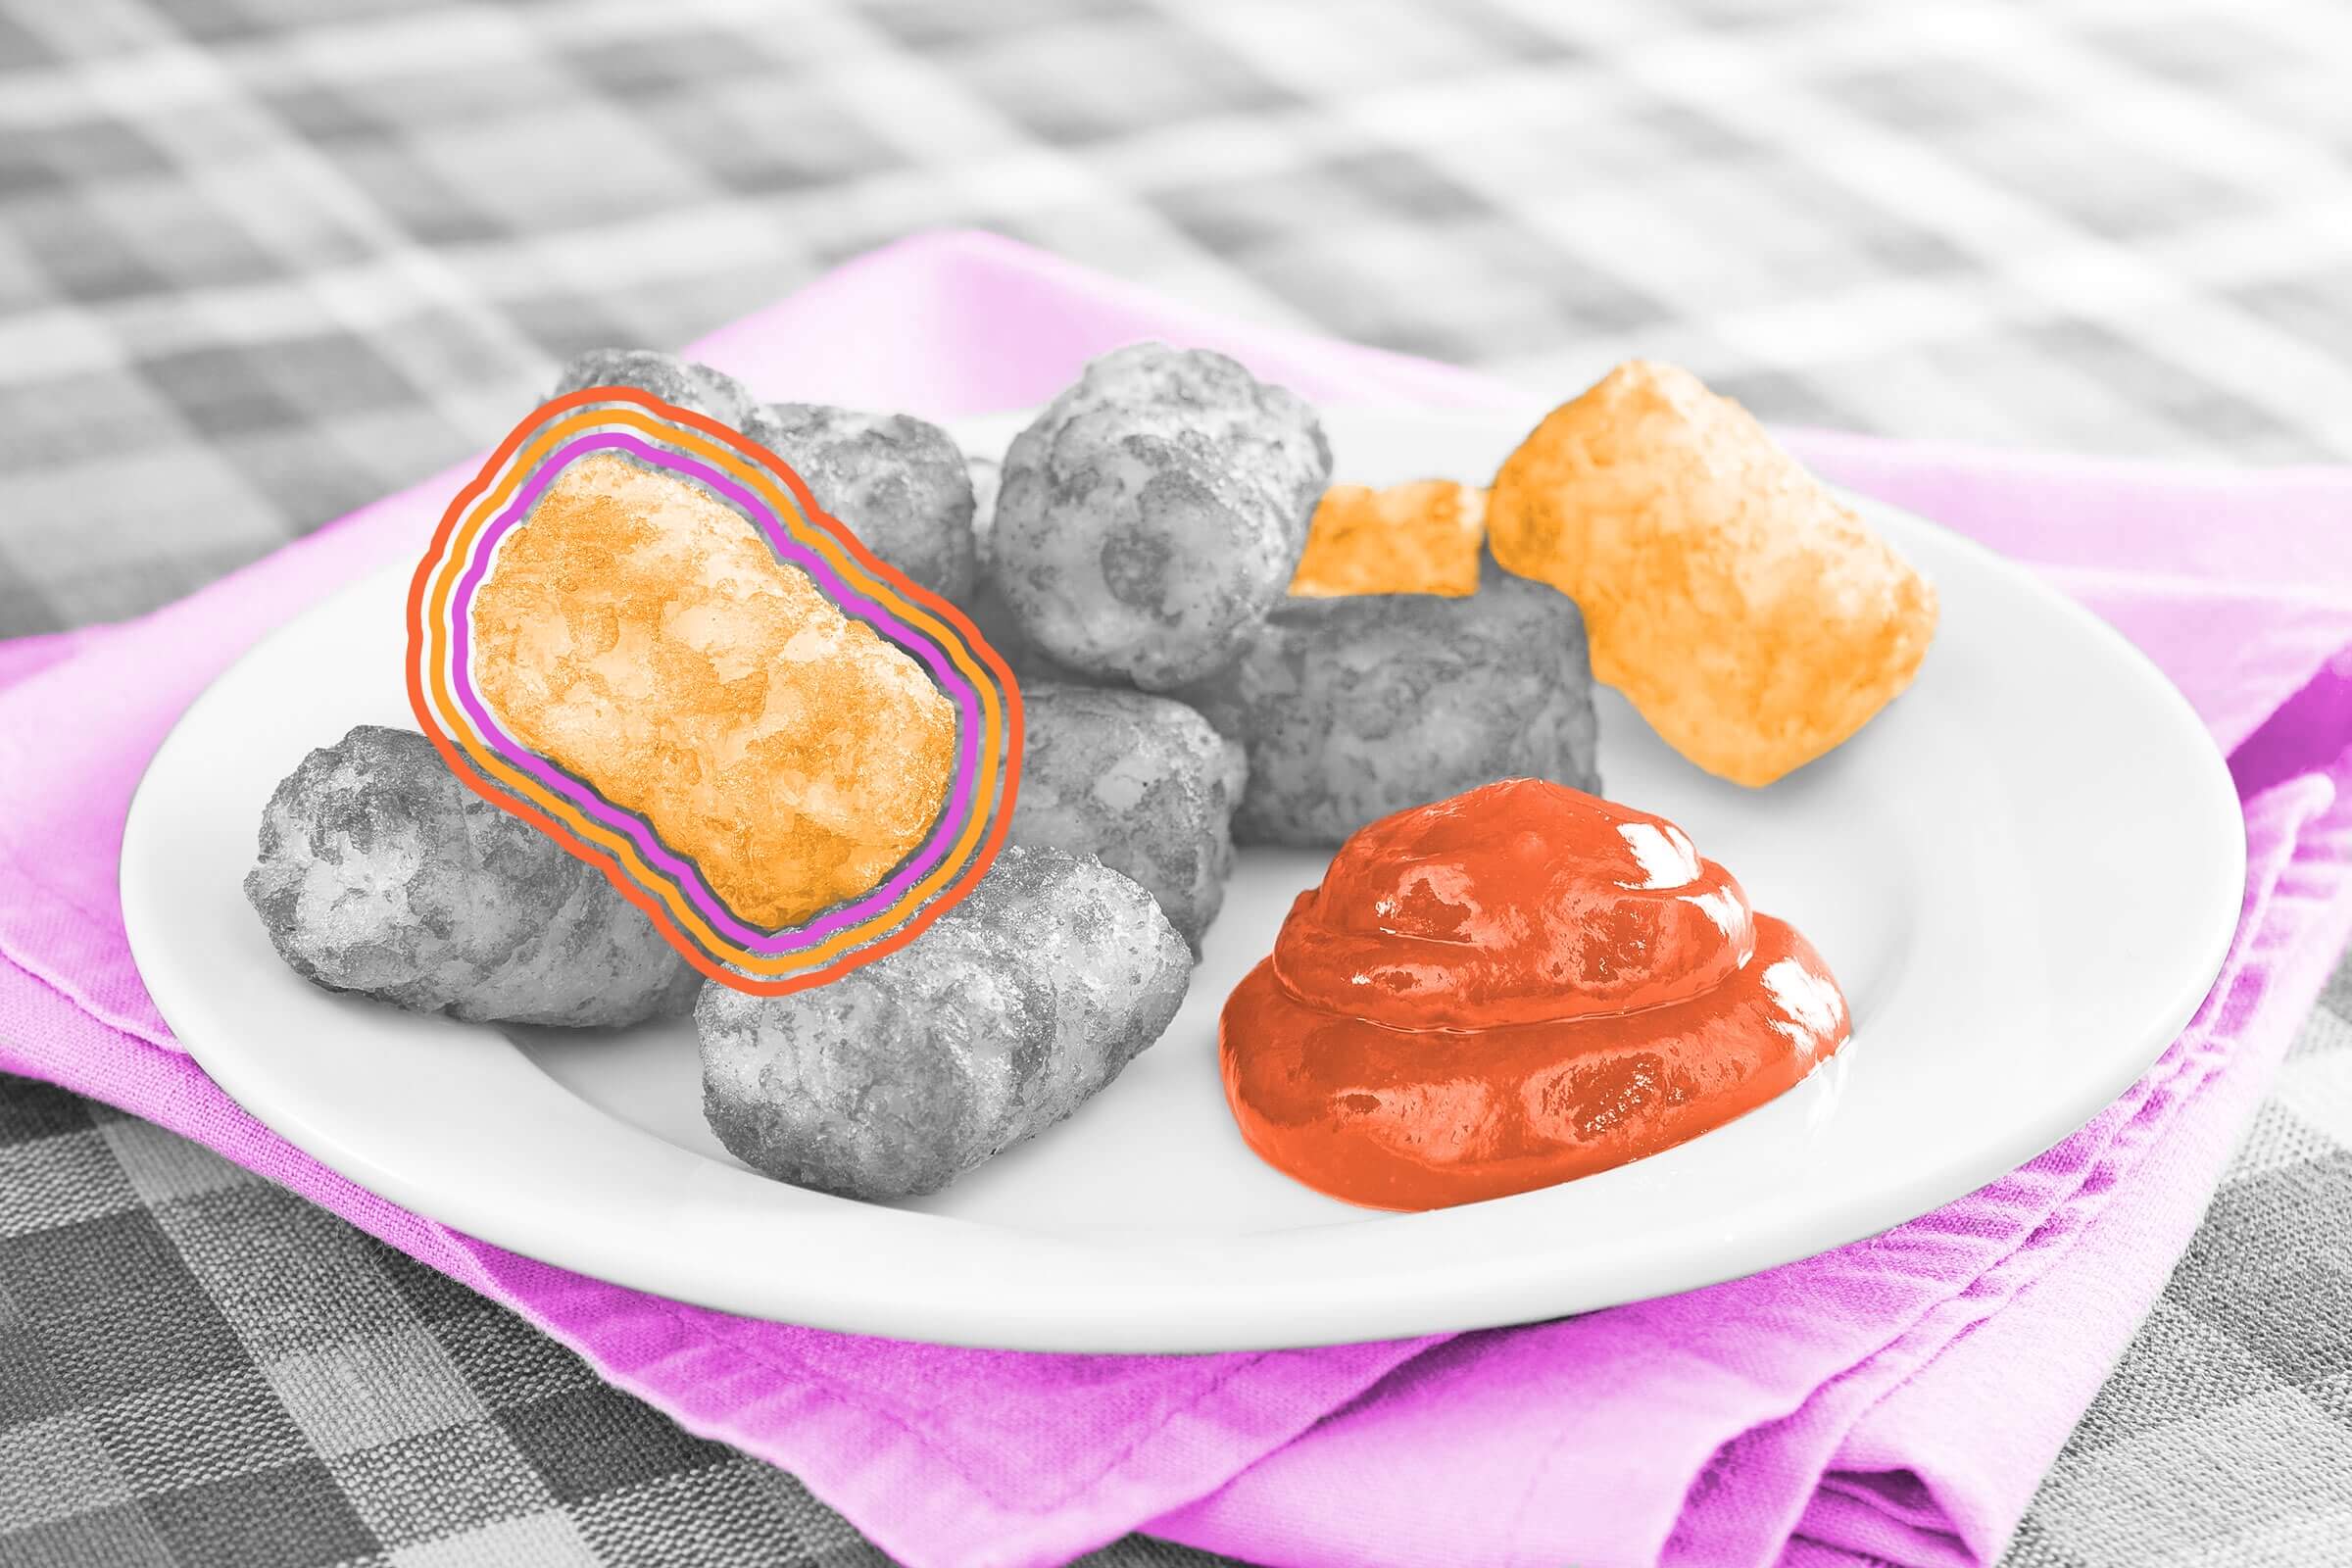 Tater Tots were invented to reduce waste.